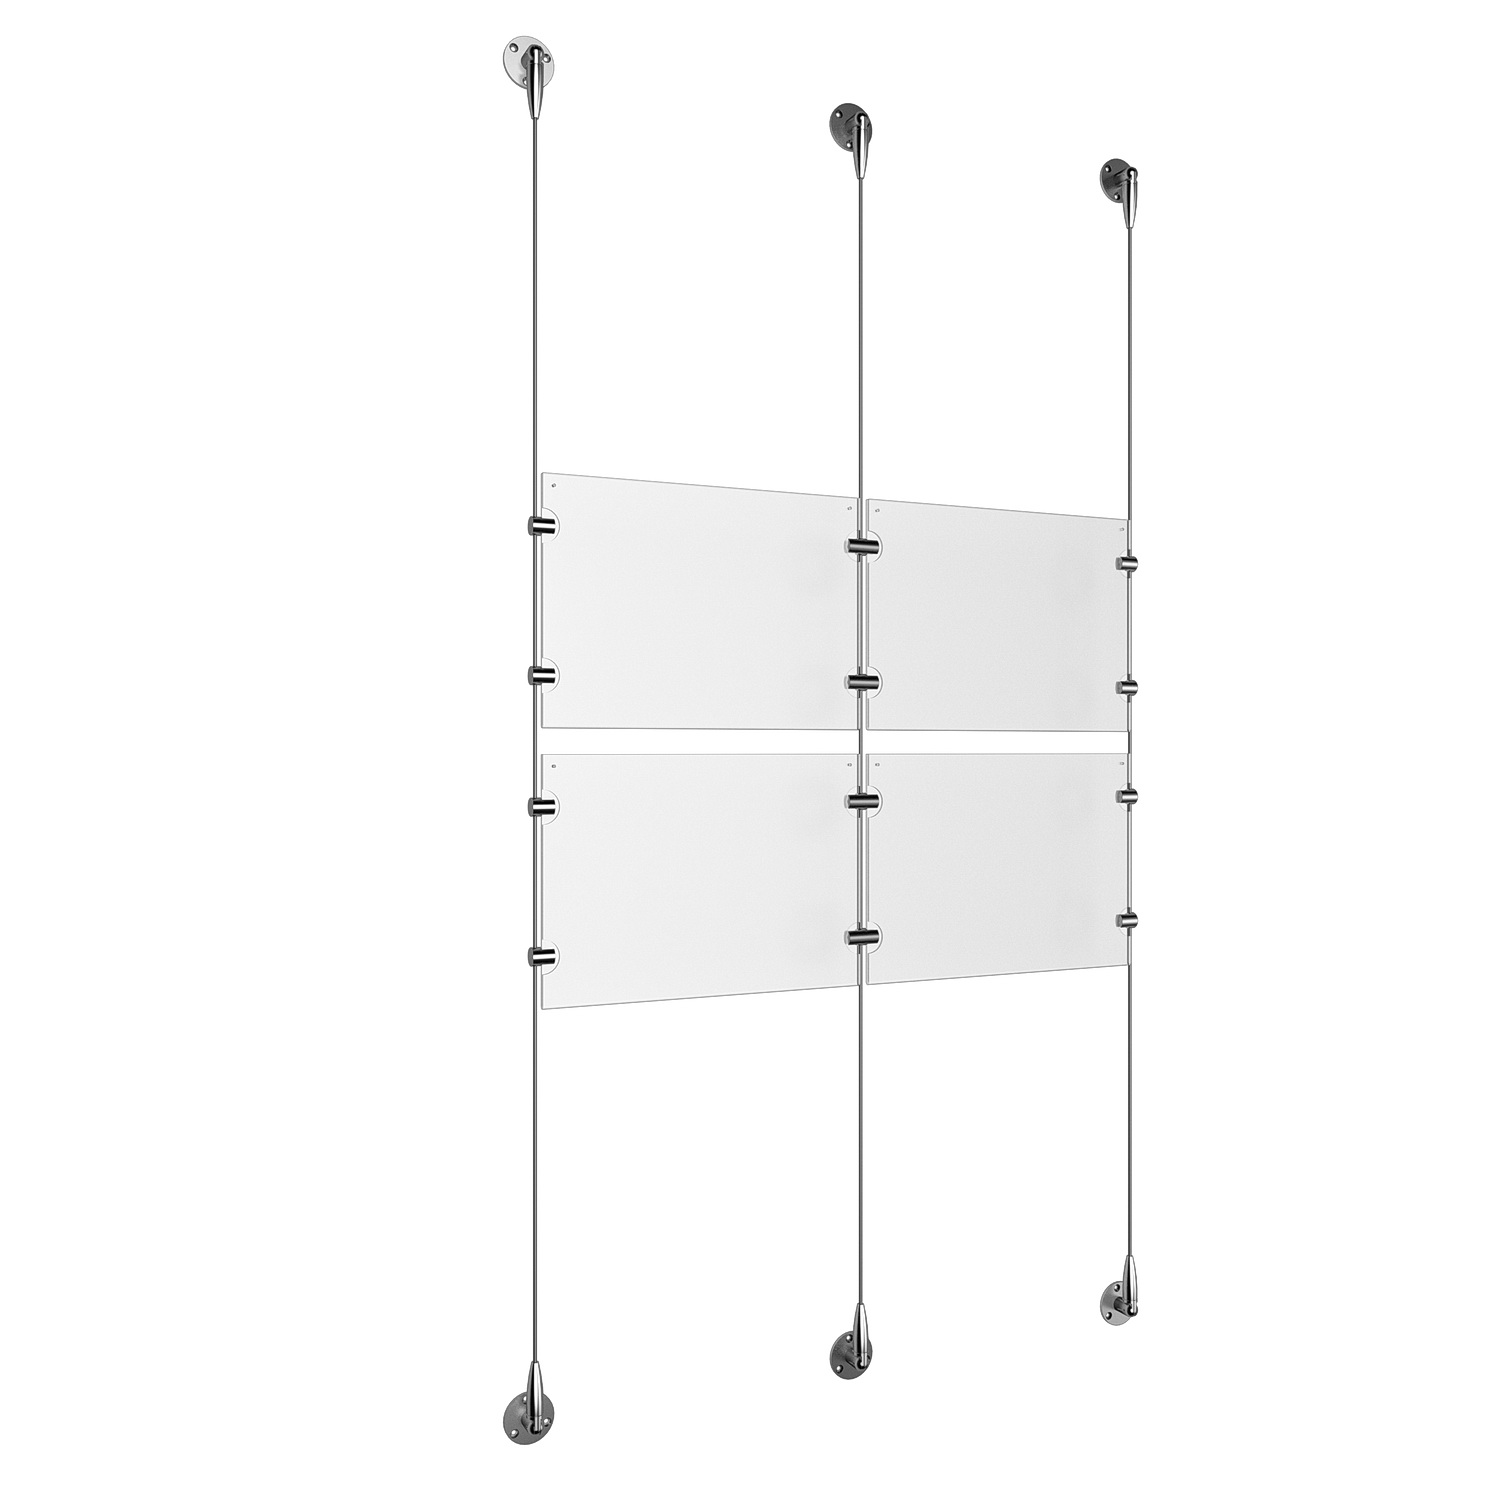 (4) 11'' Width x 8-1/2'' Height Clear Acrylic Frame & (3) Stainless Steel Satin Brushed Adjustable Angle Signature 1/8'' Cable Systems with (8) Single-Sided Panel Grippers (8) Double-Sided Panel Grippers